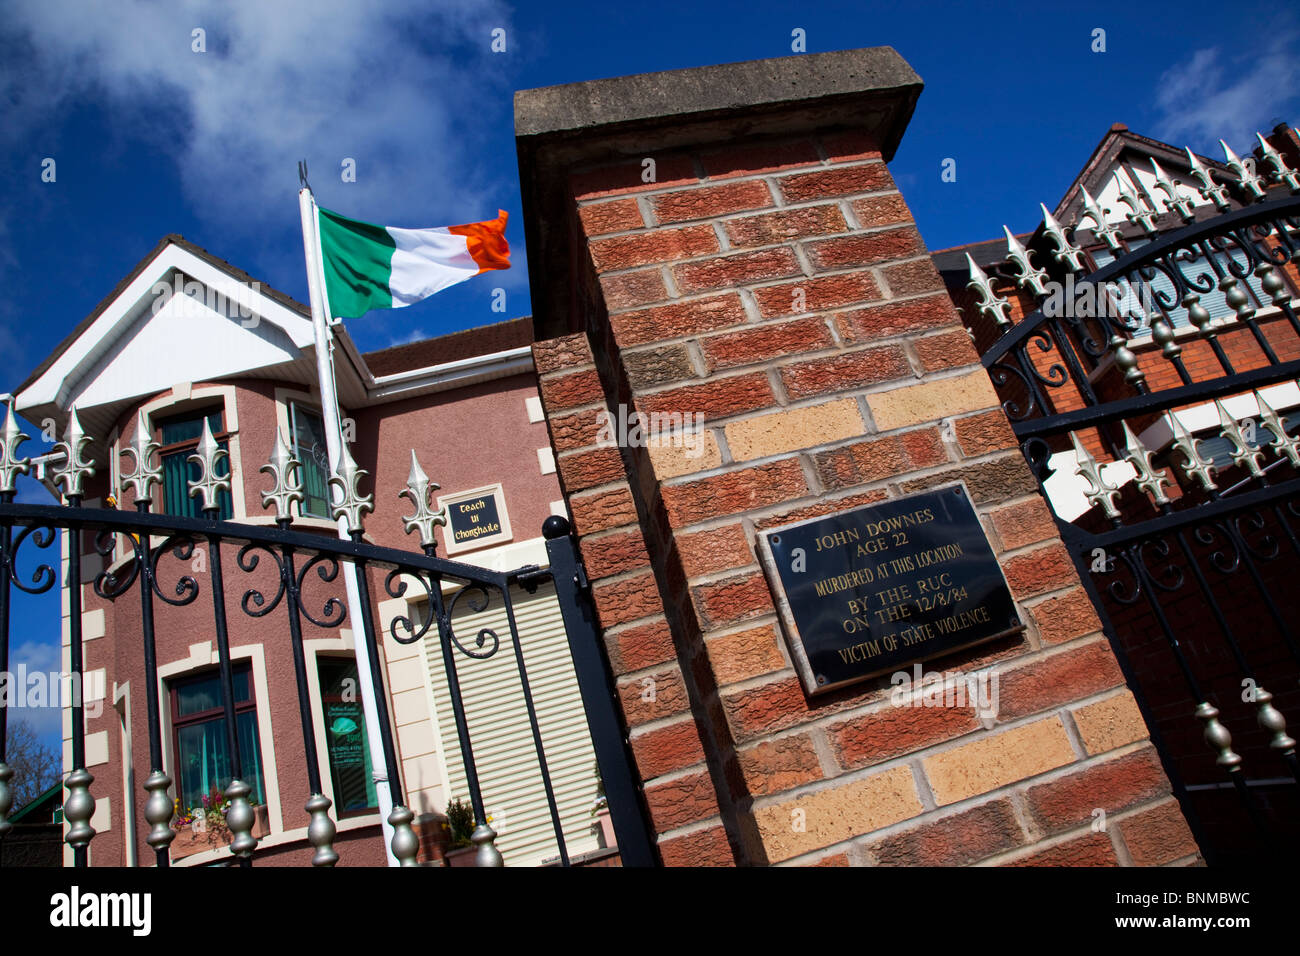 Ireland, North, Belfast, Andersonstown, James Connolly House, Sinn Fein Headquarters with Irish Tricolour flag flying. Stock Photo